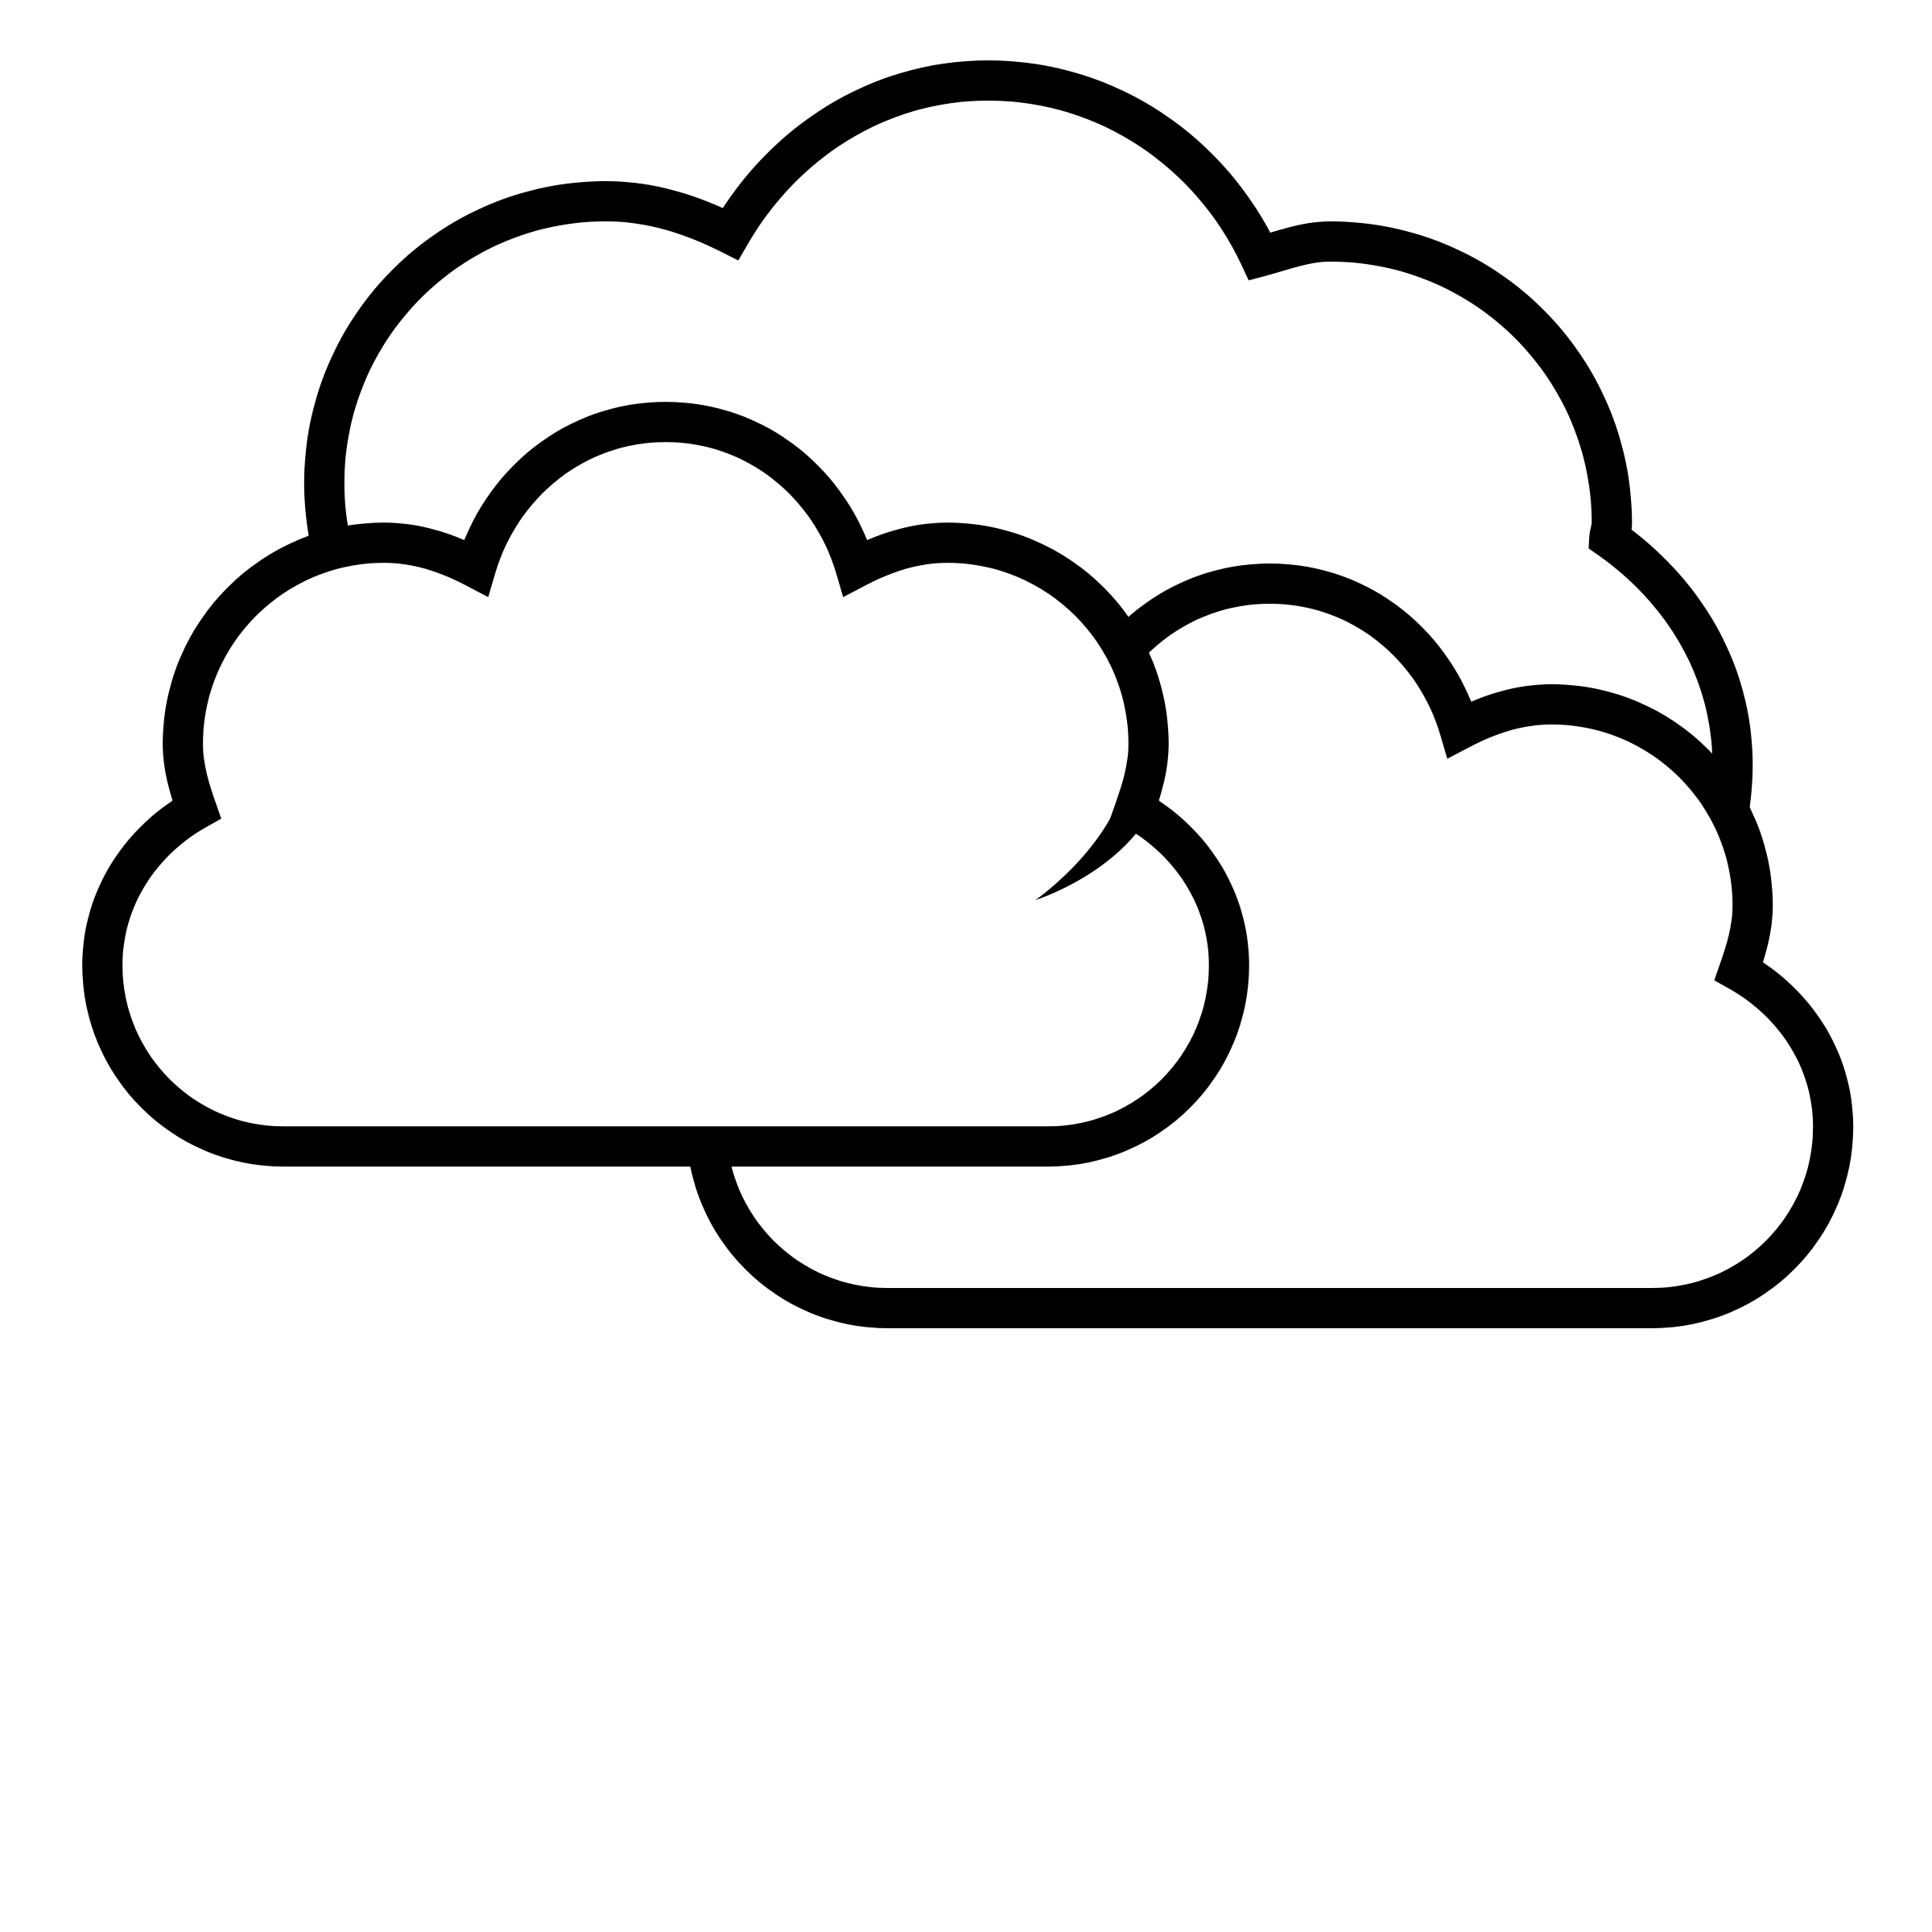 Weather Clipart Black And White Cloudy - ClipArt Best